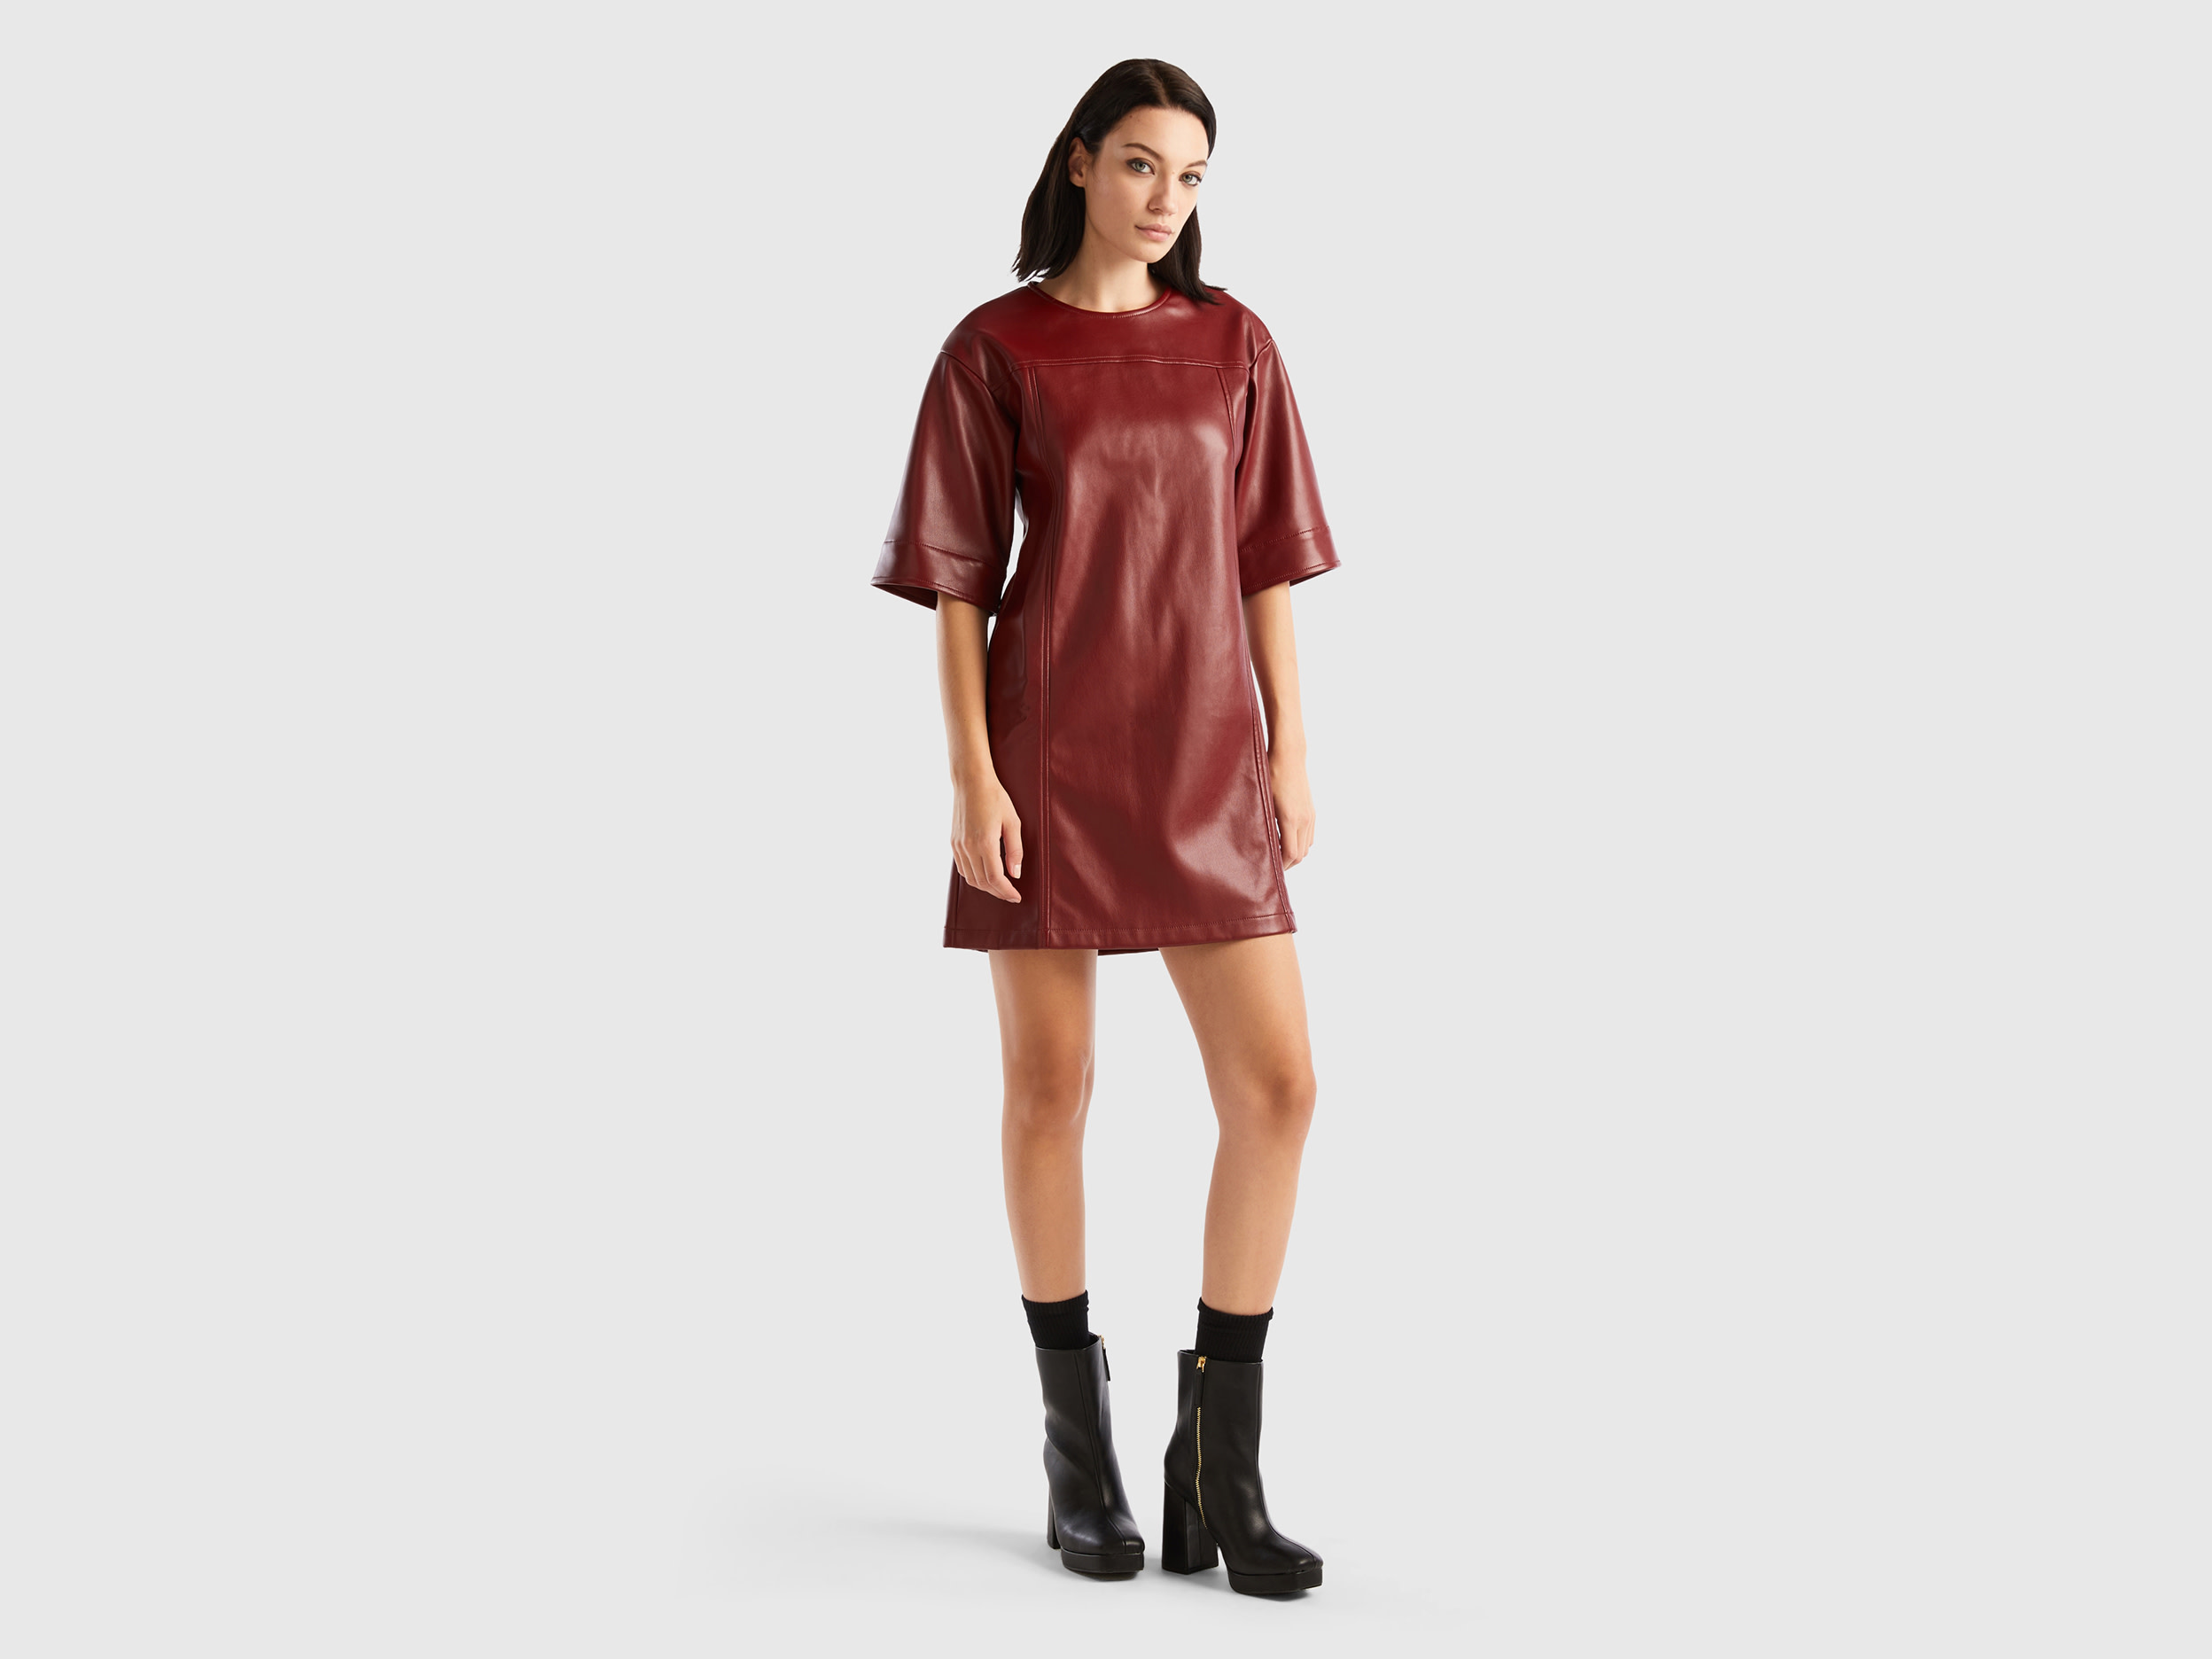 Benetton, Cropped Dress In Imitation Leather Fabric, size XL, Burgundy, Women